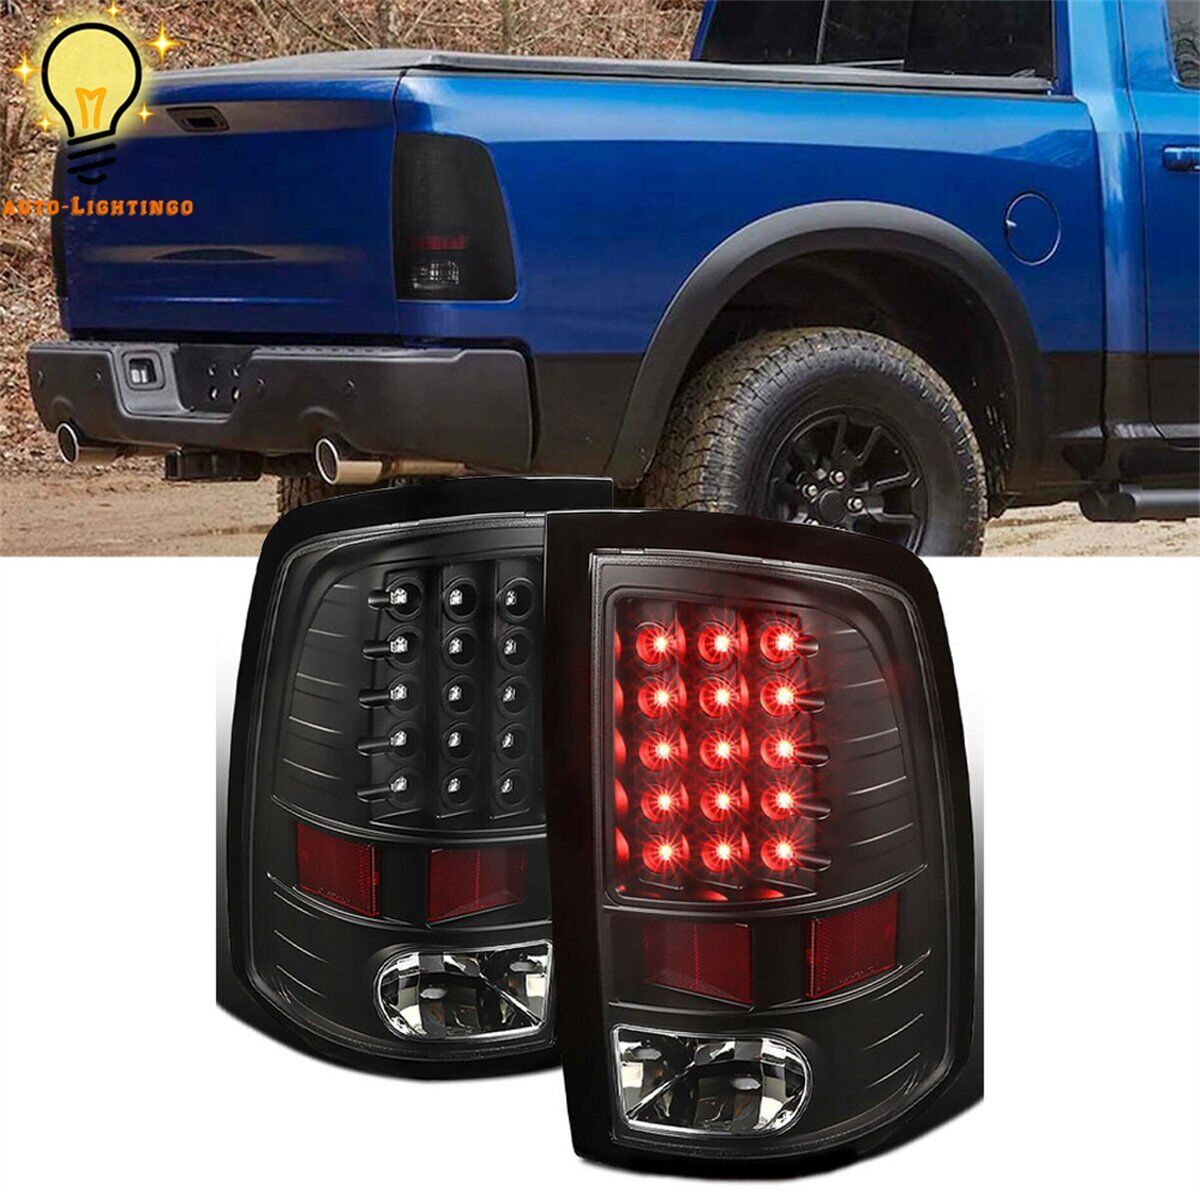 Smoked Lens  Tail Lights Assembly For 2009 2010 2011-2018 Dodge Ram 1500 LH+RH